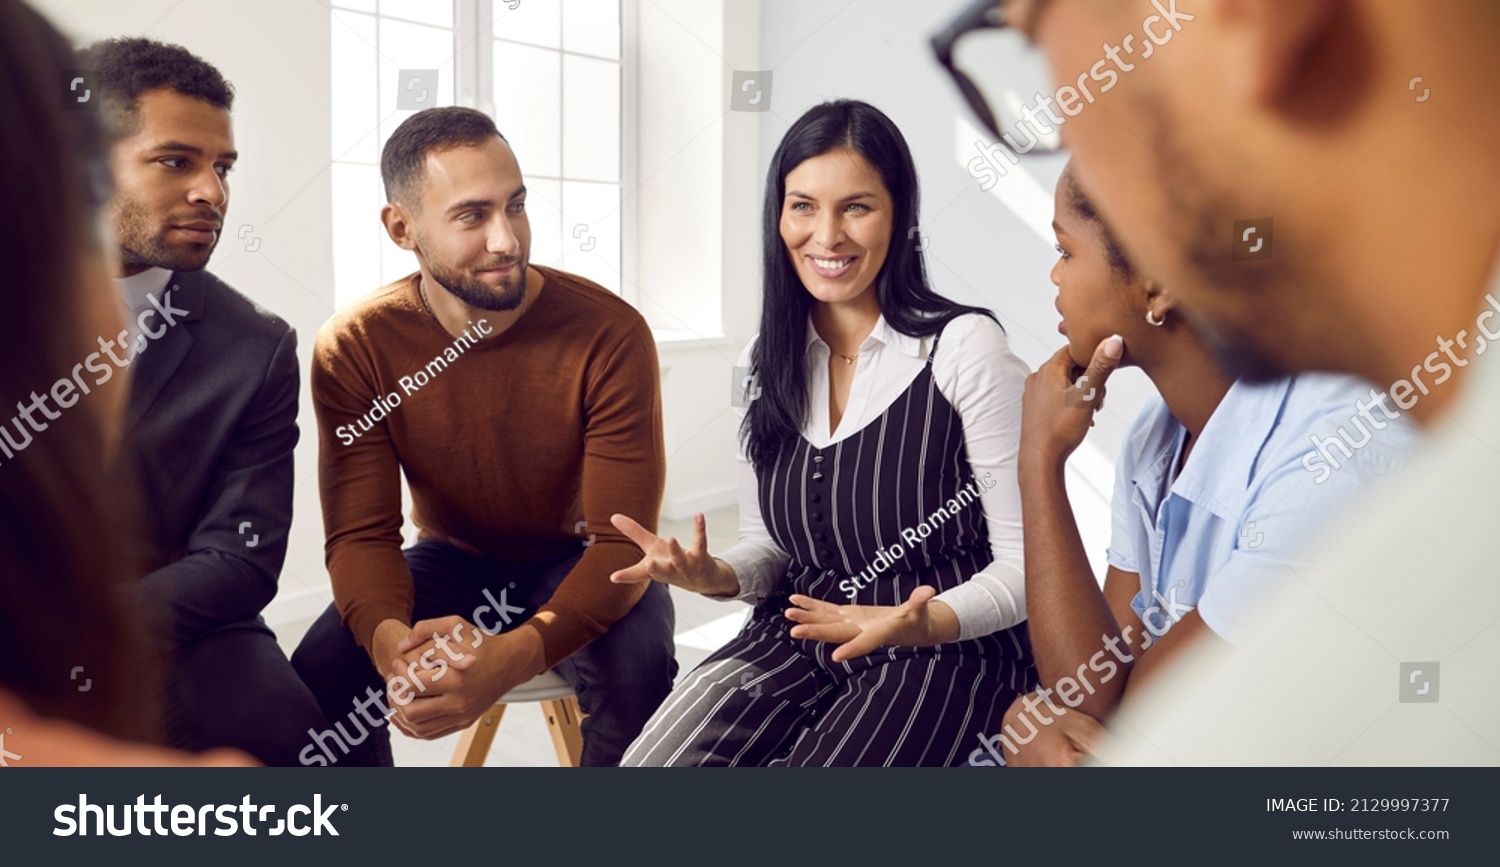 Female coach or team leader tells funny story or joke to diverse team during work meeting. Multiracial employees sitting in circle on chairs during informal brainstorming exchange ideas. #2129997377